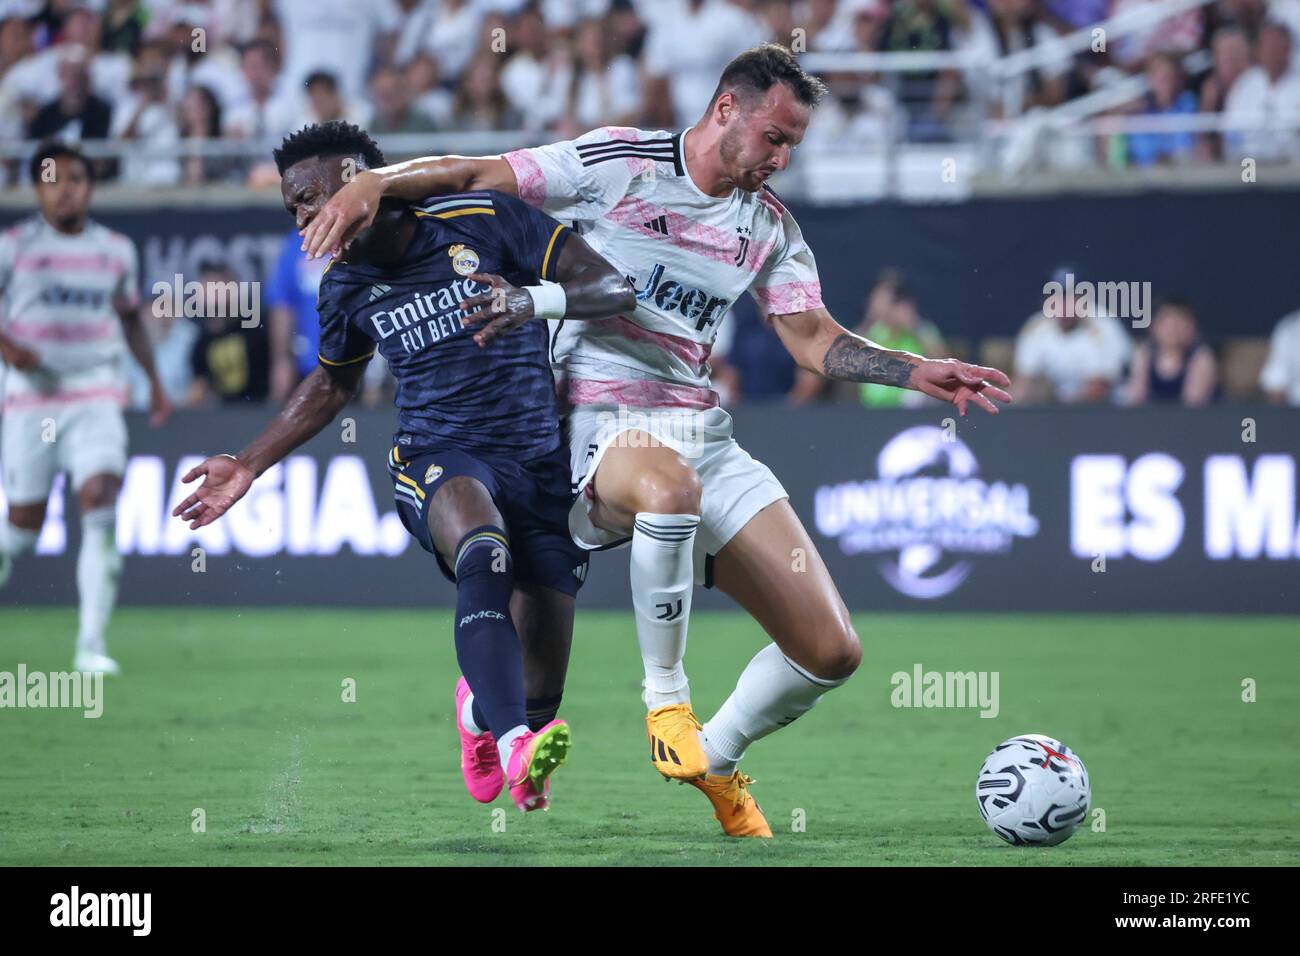 United States this Wednesday, August 2nd. Federico Gatti of Juventus and Vini Jr. Real Madrid, International friendly match at Camping World Stadium in the city of Orlando in the United States this Wednesday, August 2nd. Credit: Brazil Photo Press/Alamy Live News Stock Photo